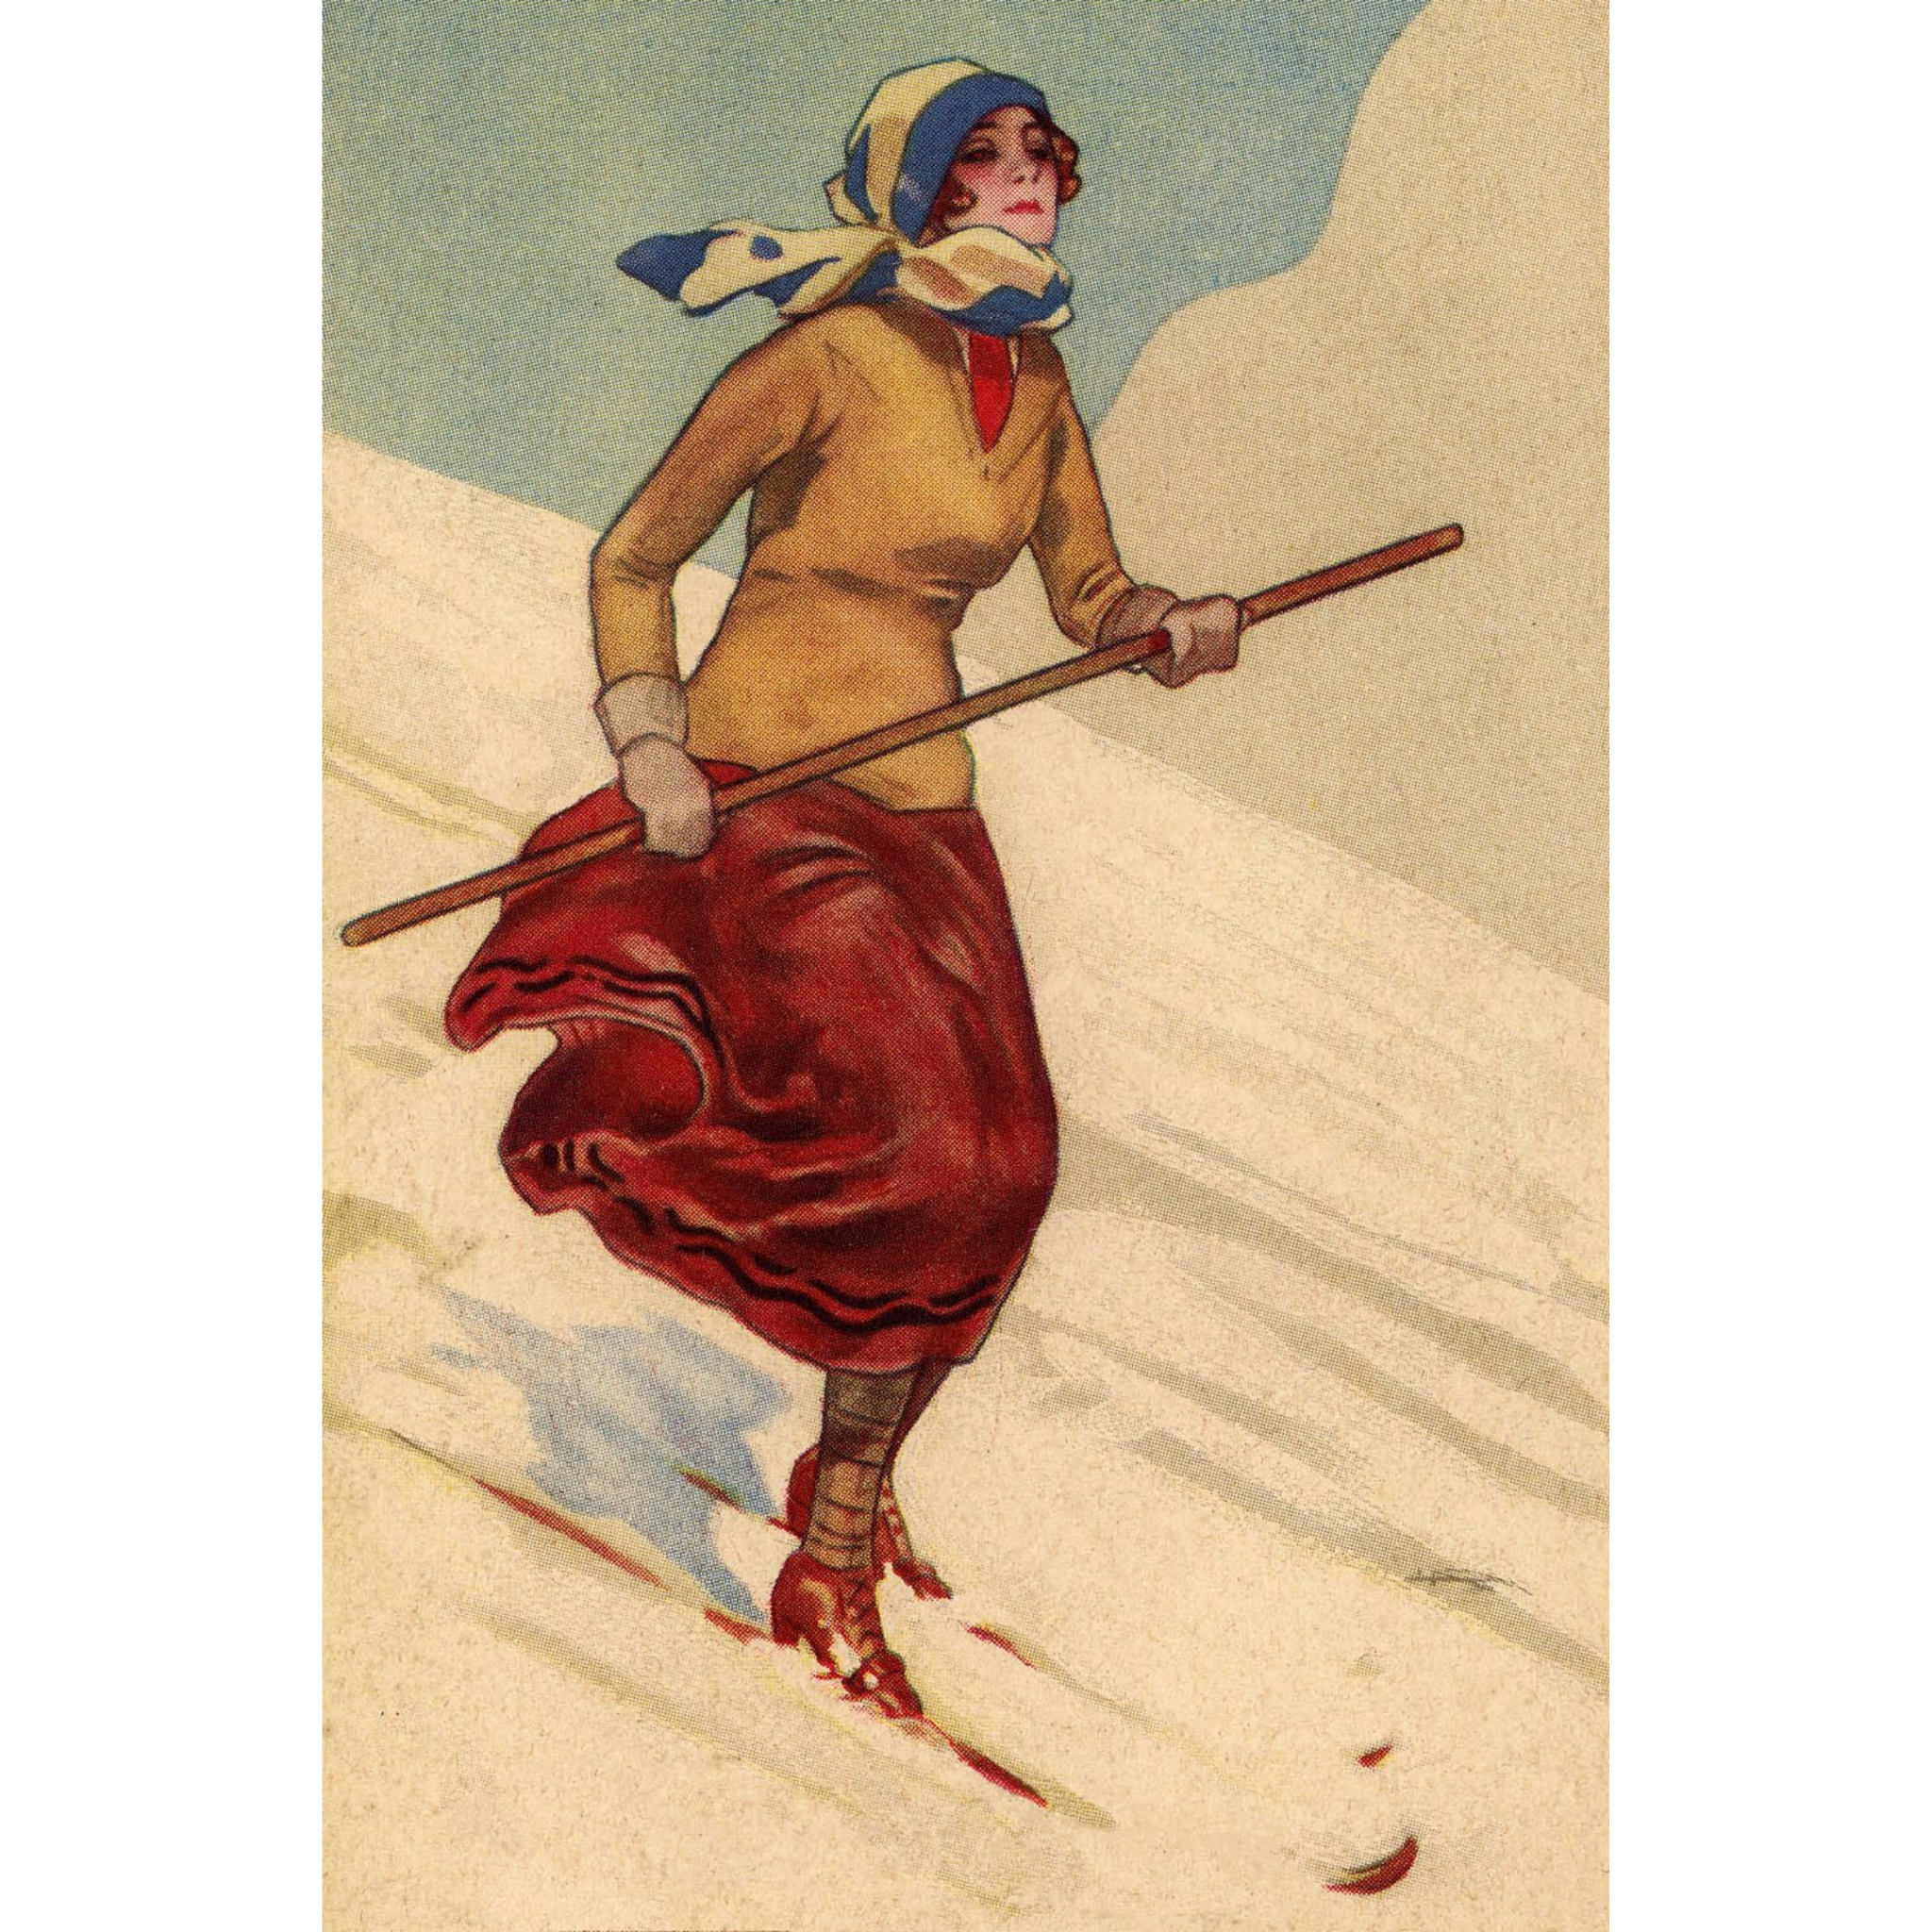 Woman Skiing in Red Skirt - ca. 1925 Lithograph